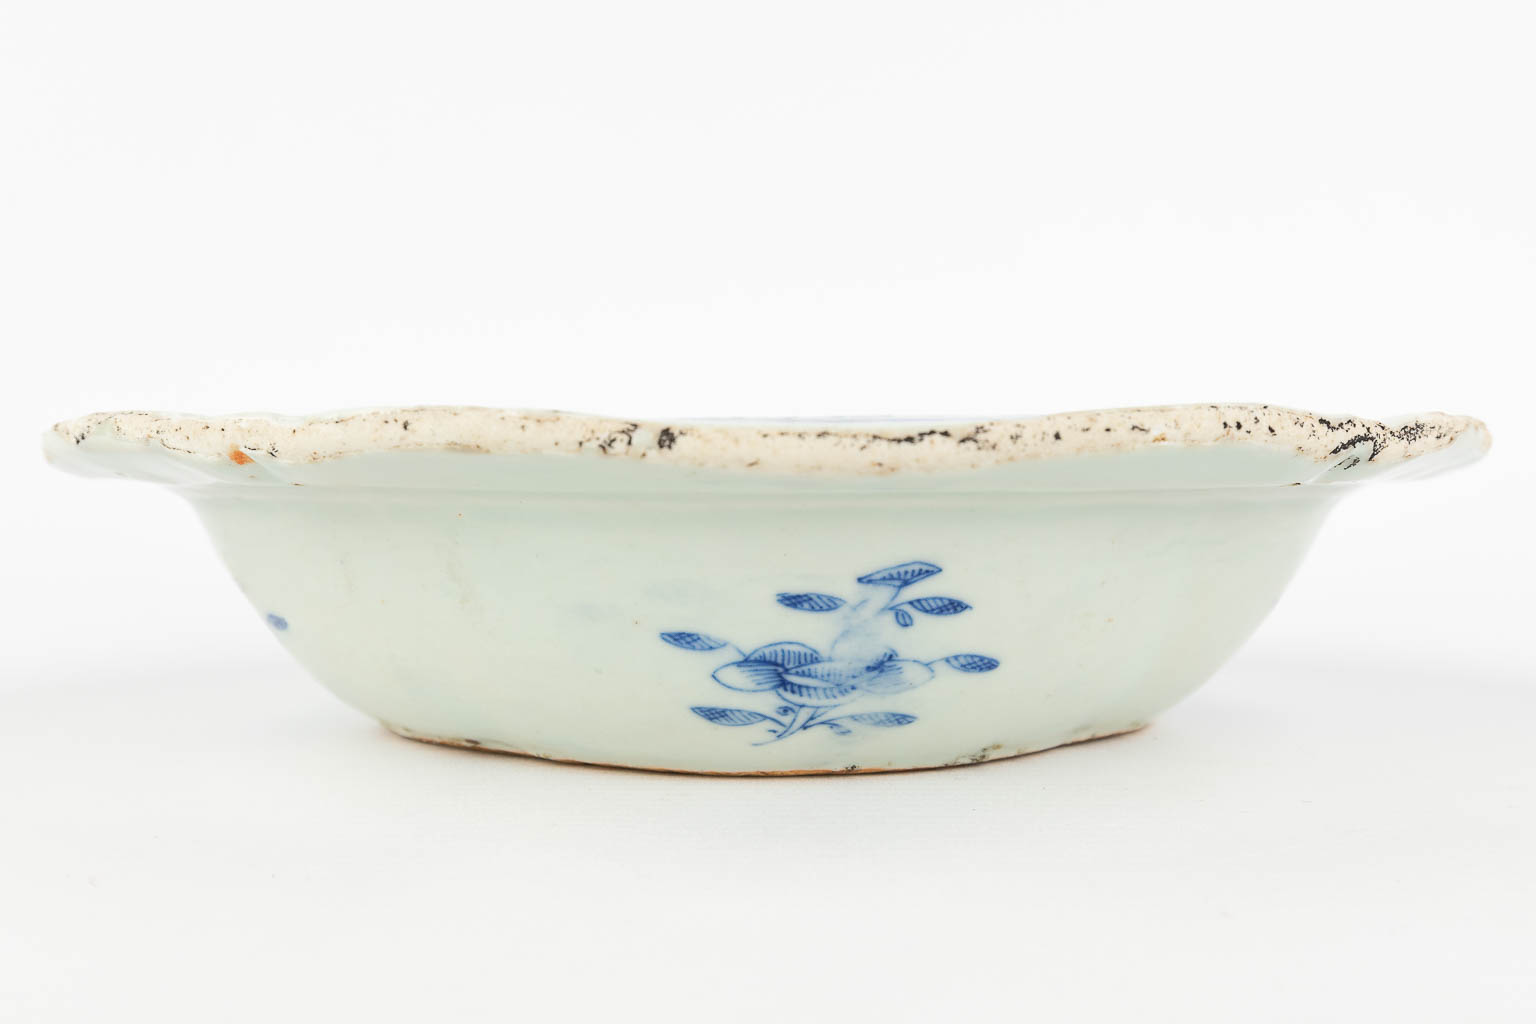 A Chinese bowl with a lid and blue-white landscape decor. 19th C. (L: 21,5 x W: 26,5 x H: 10 cm)